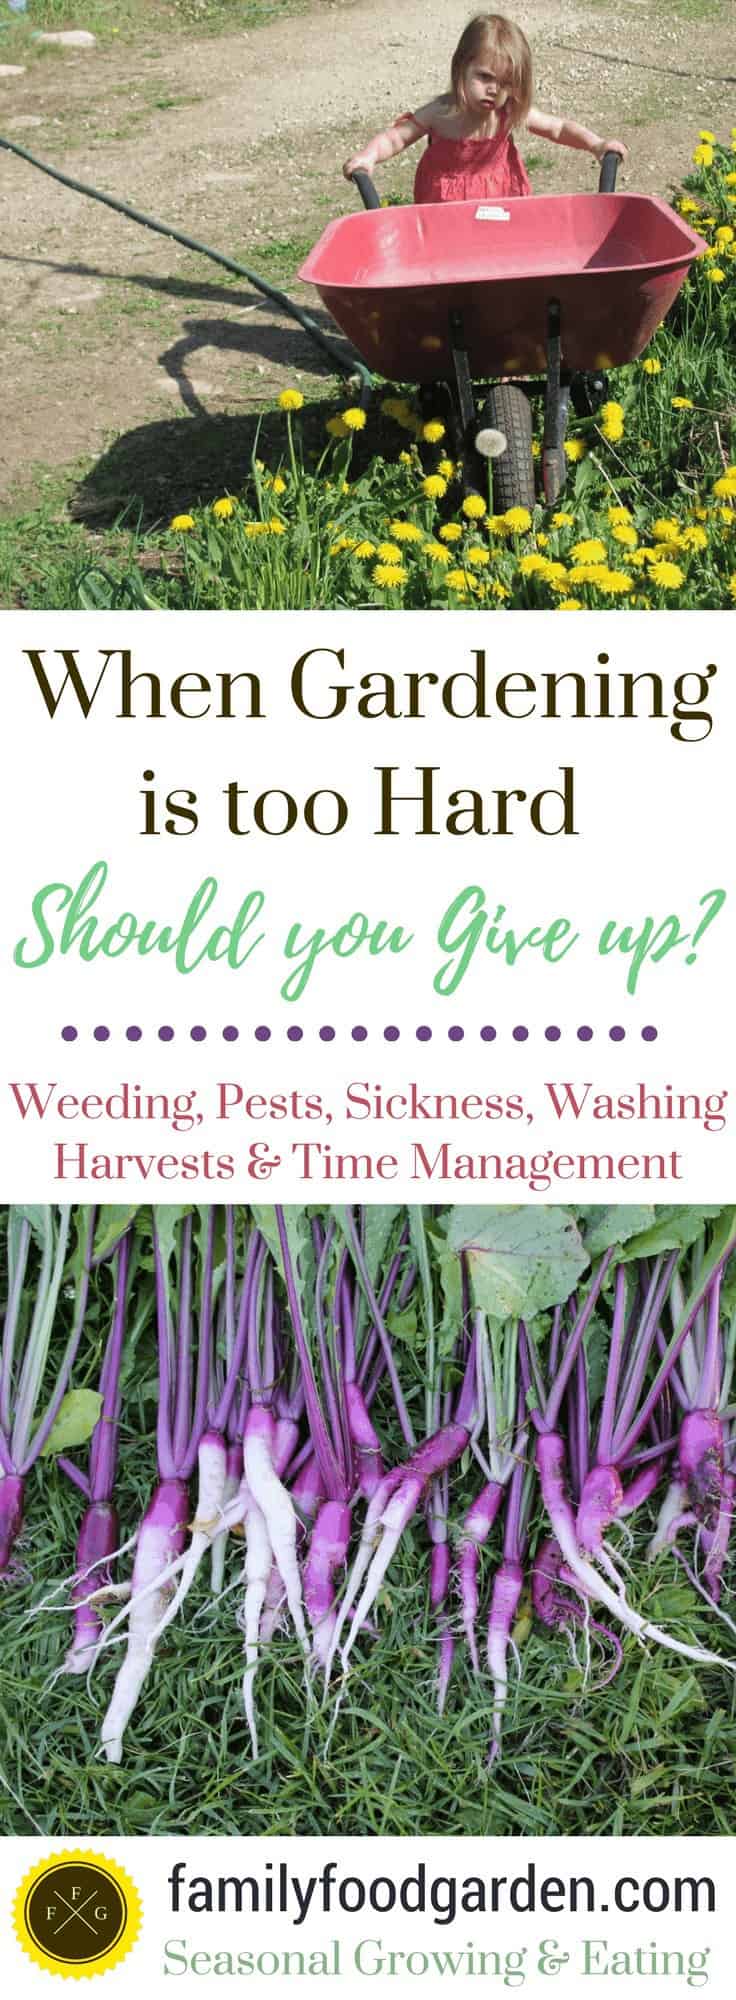 When Gardening is too Hard: Should you give up?